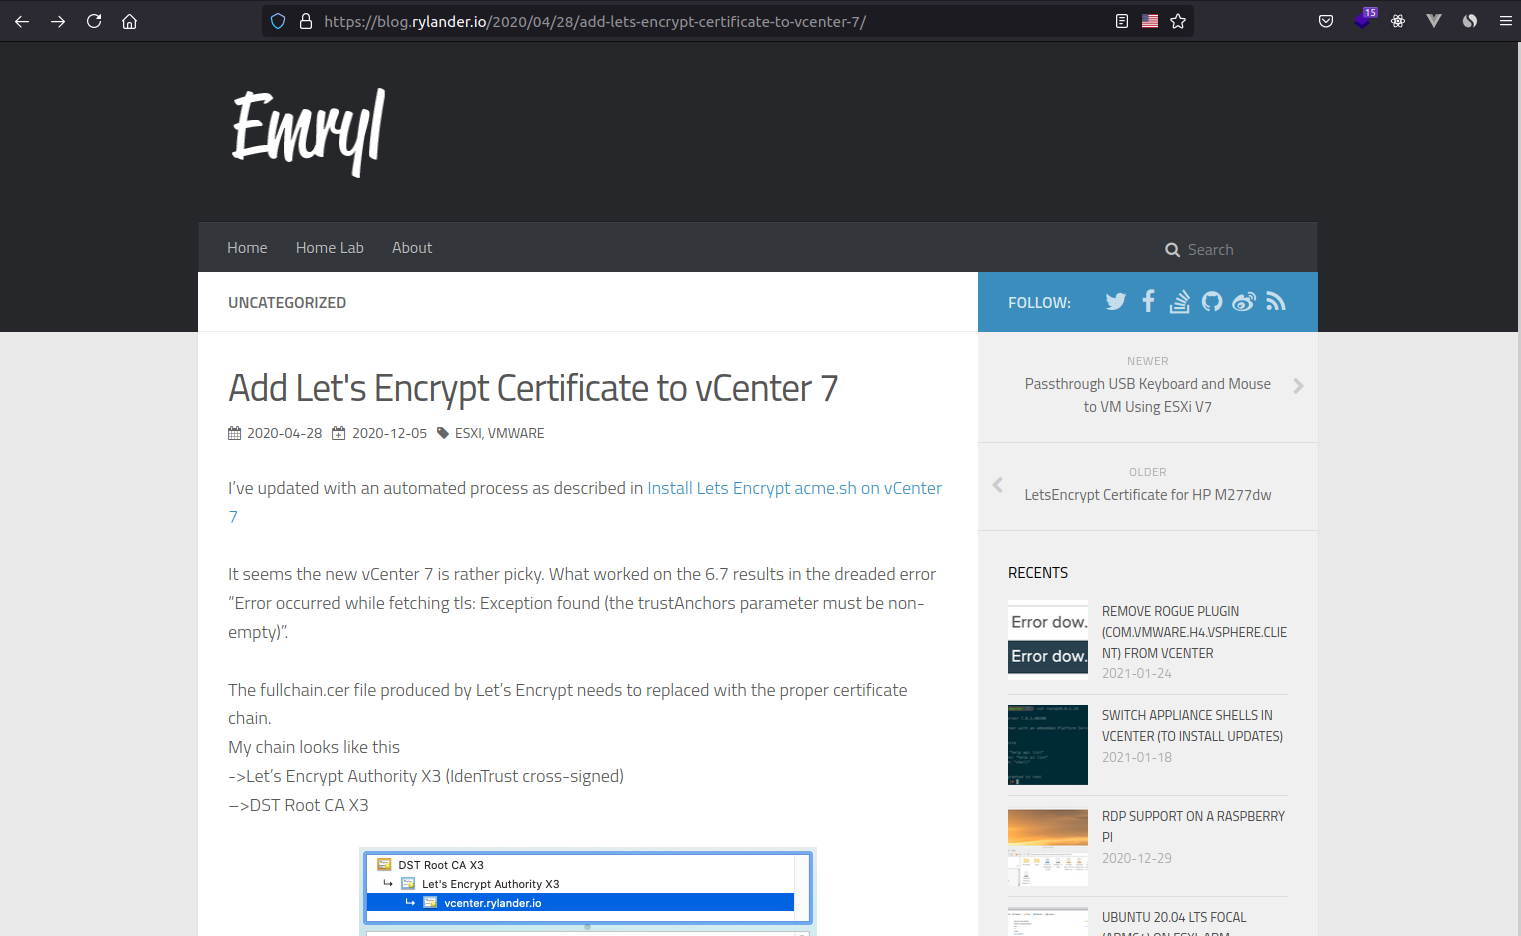 Add Let’s Encrypt Certificate to vCenter 7